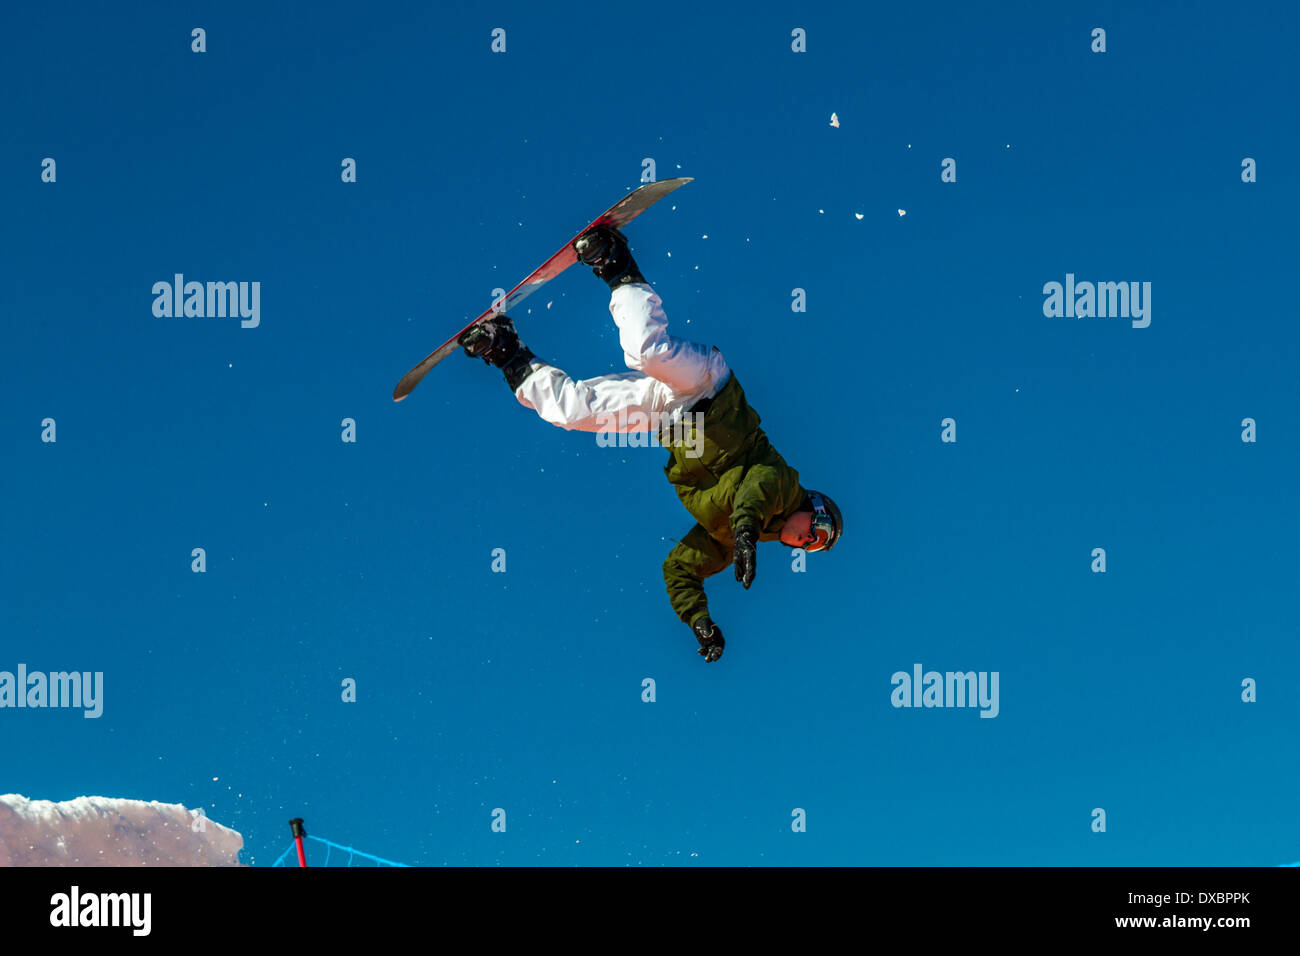 Airborne snowboarder about to land in a heap on a giant airbag Stock Photo